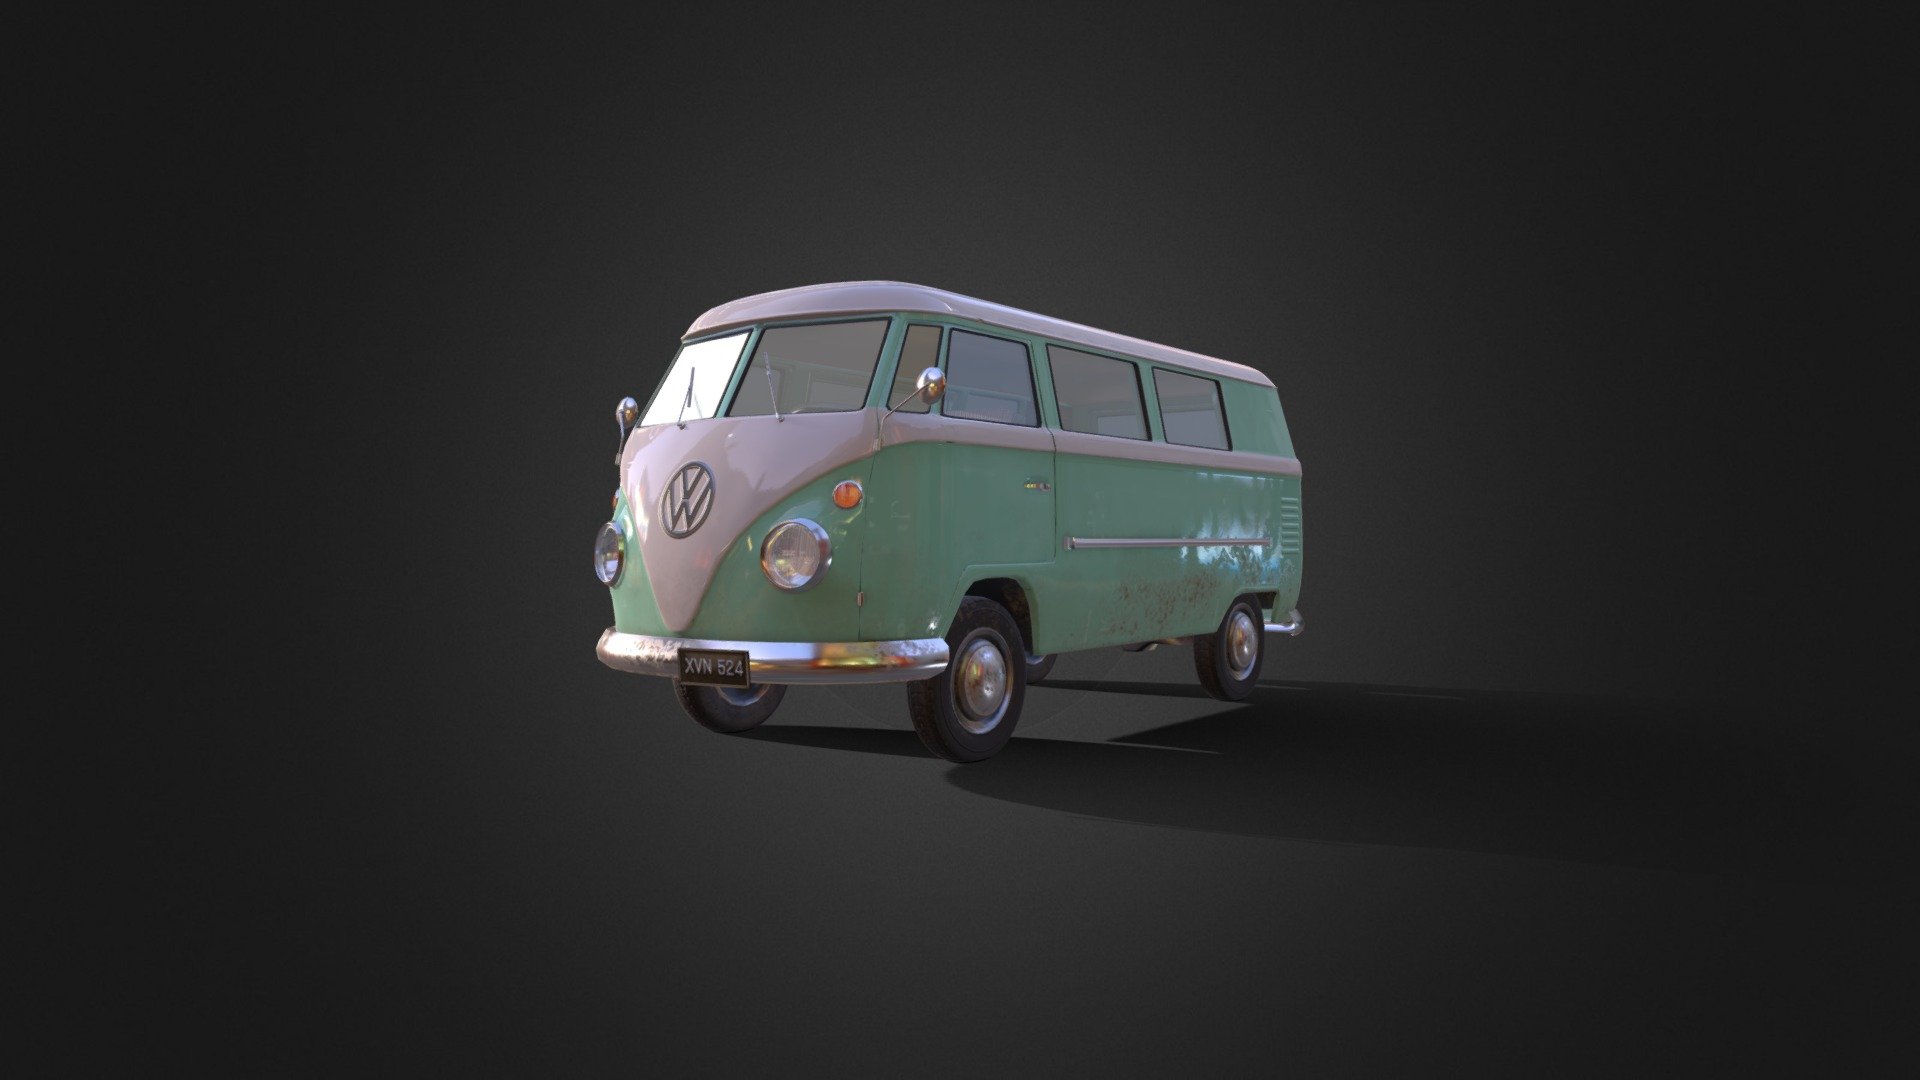 Low Poly model ready to use in games 3d model